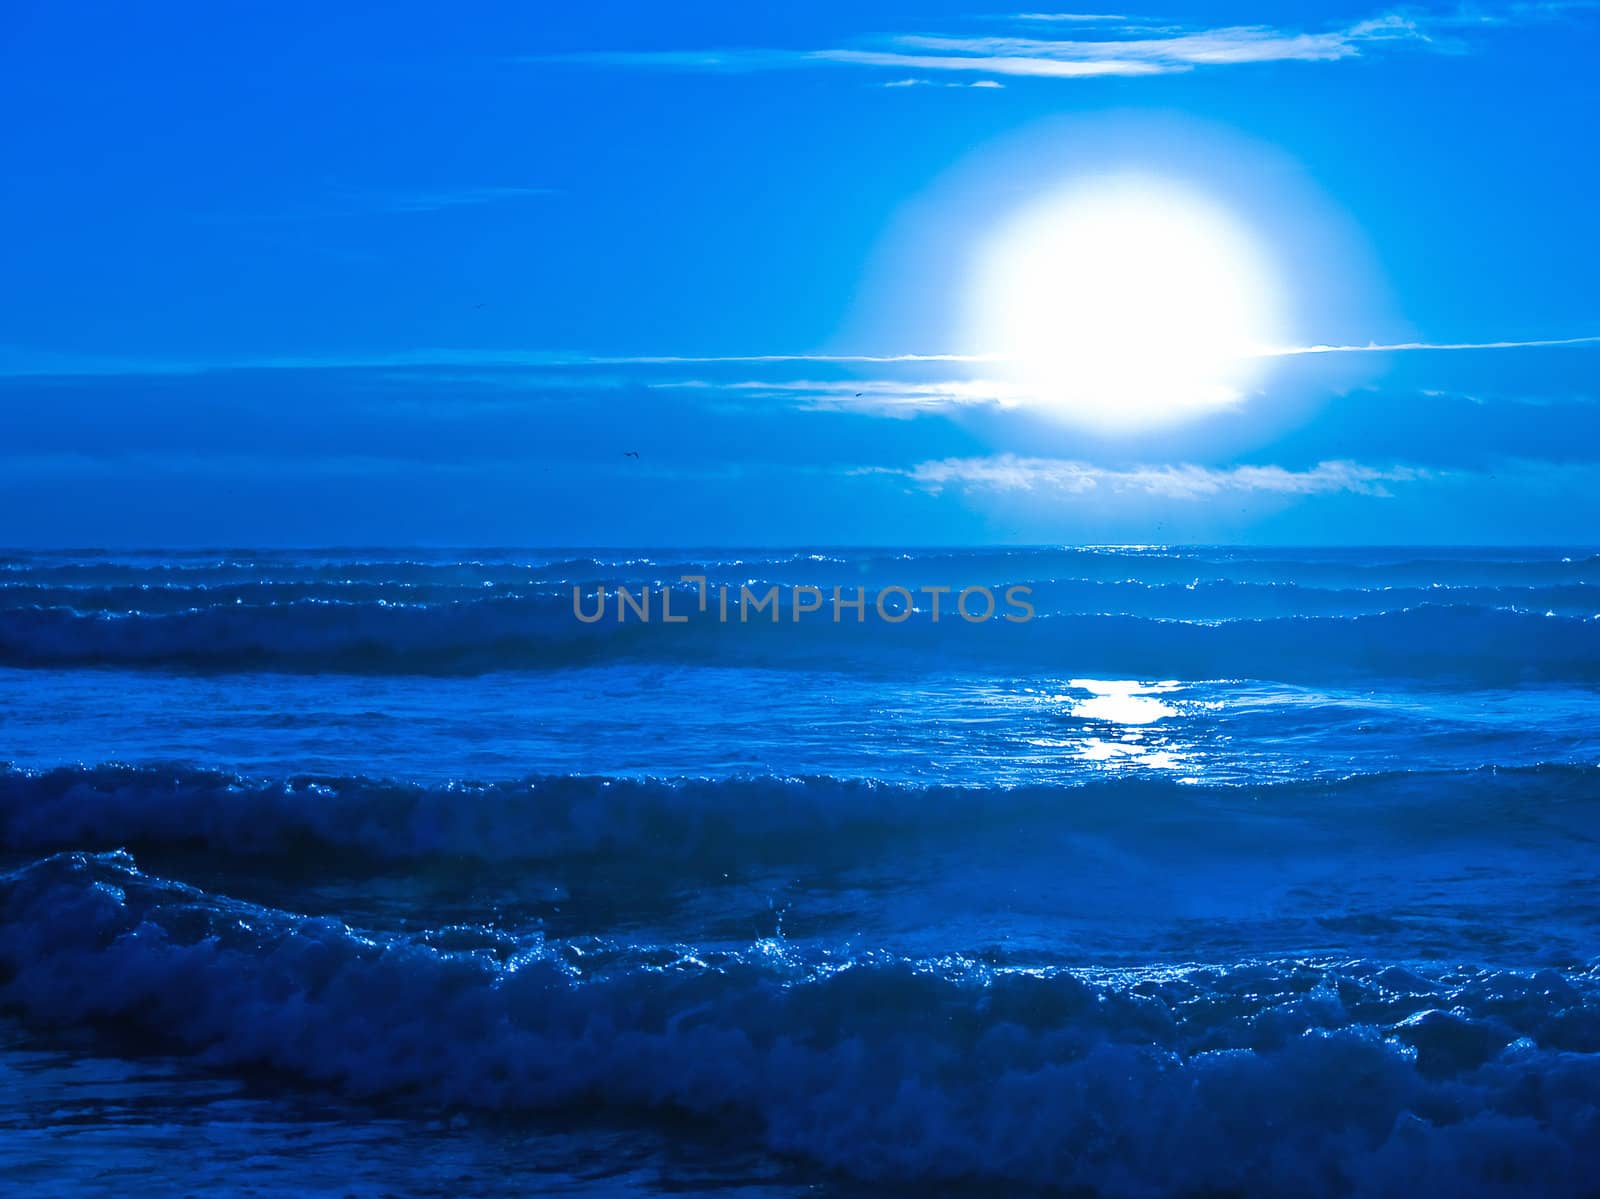 Blue Sunset Over the Ocean with Waves in the Foreground by Frankljunior